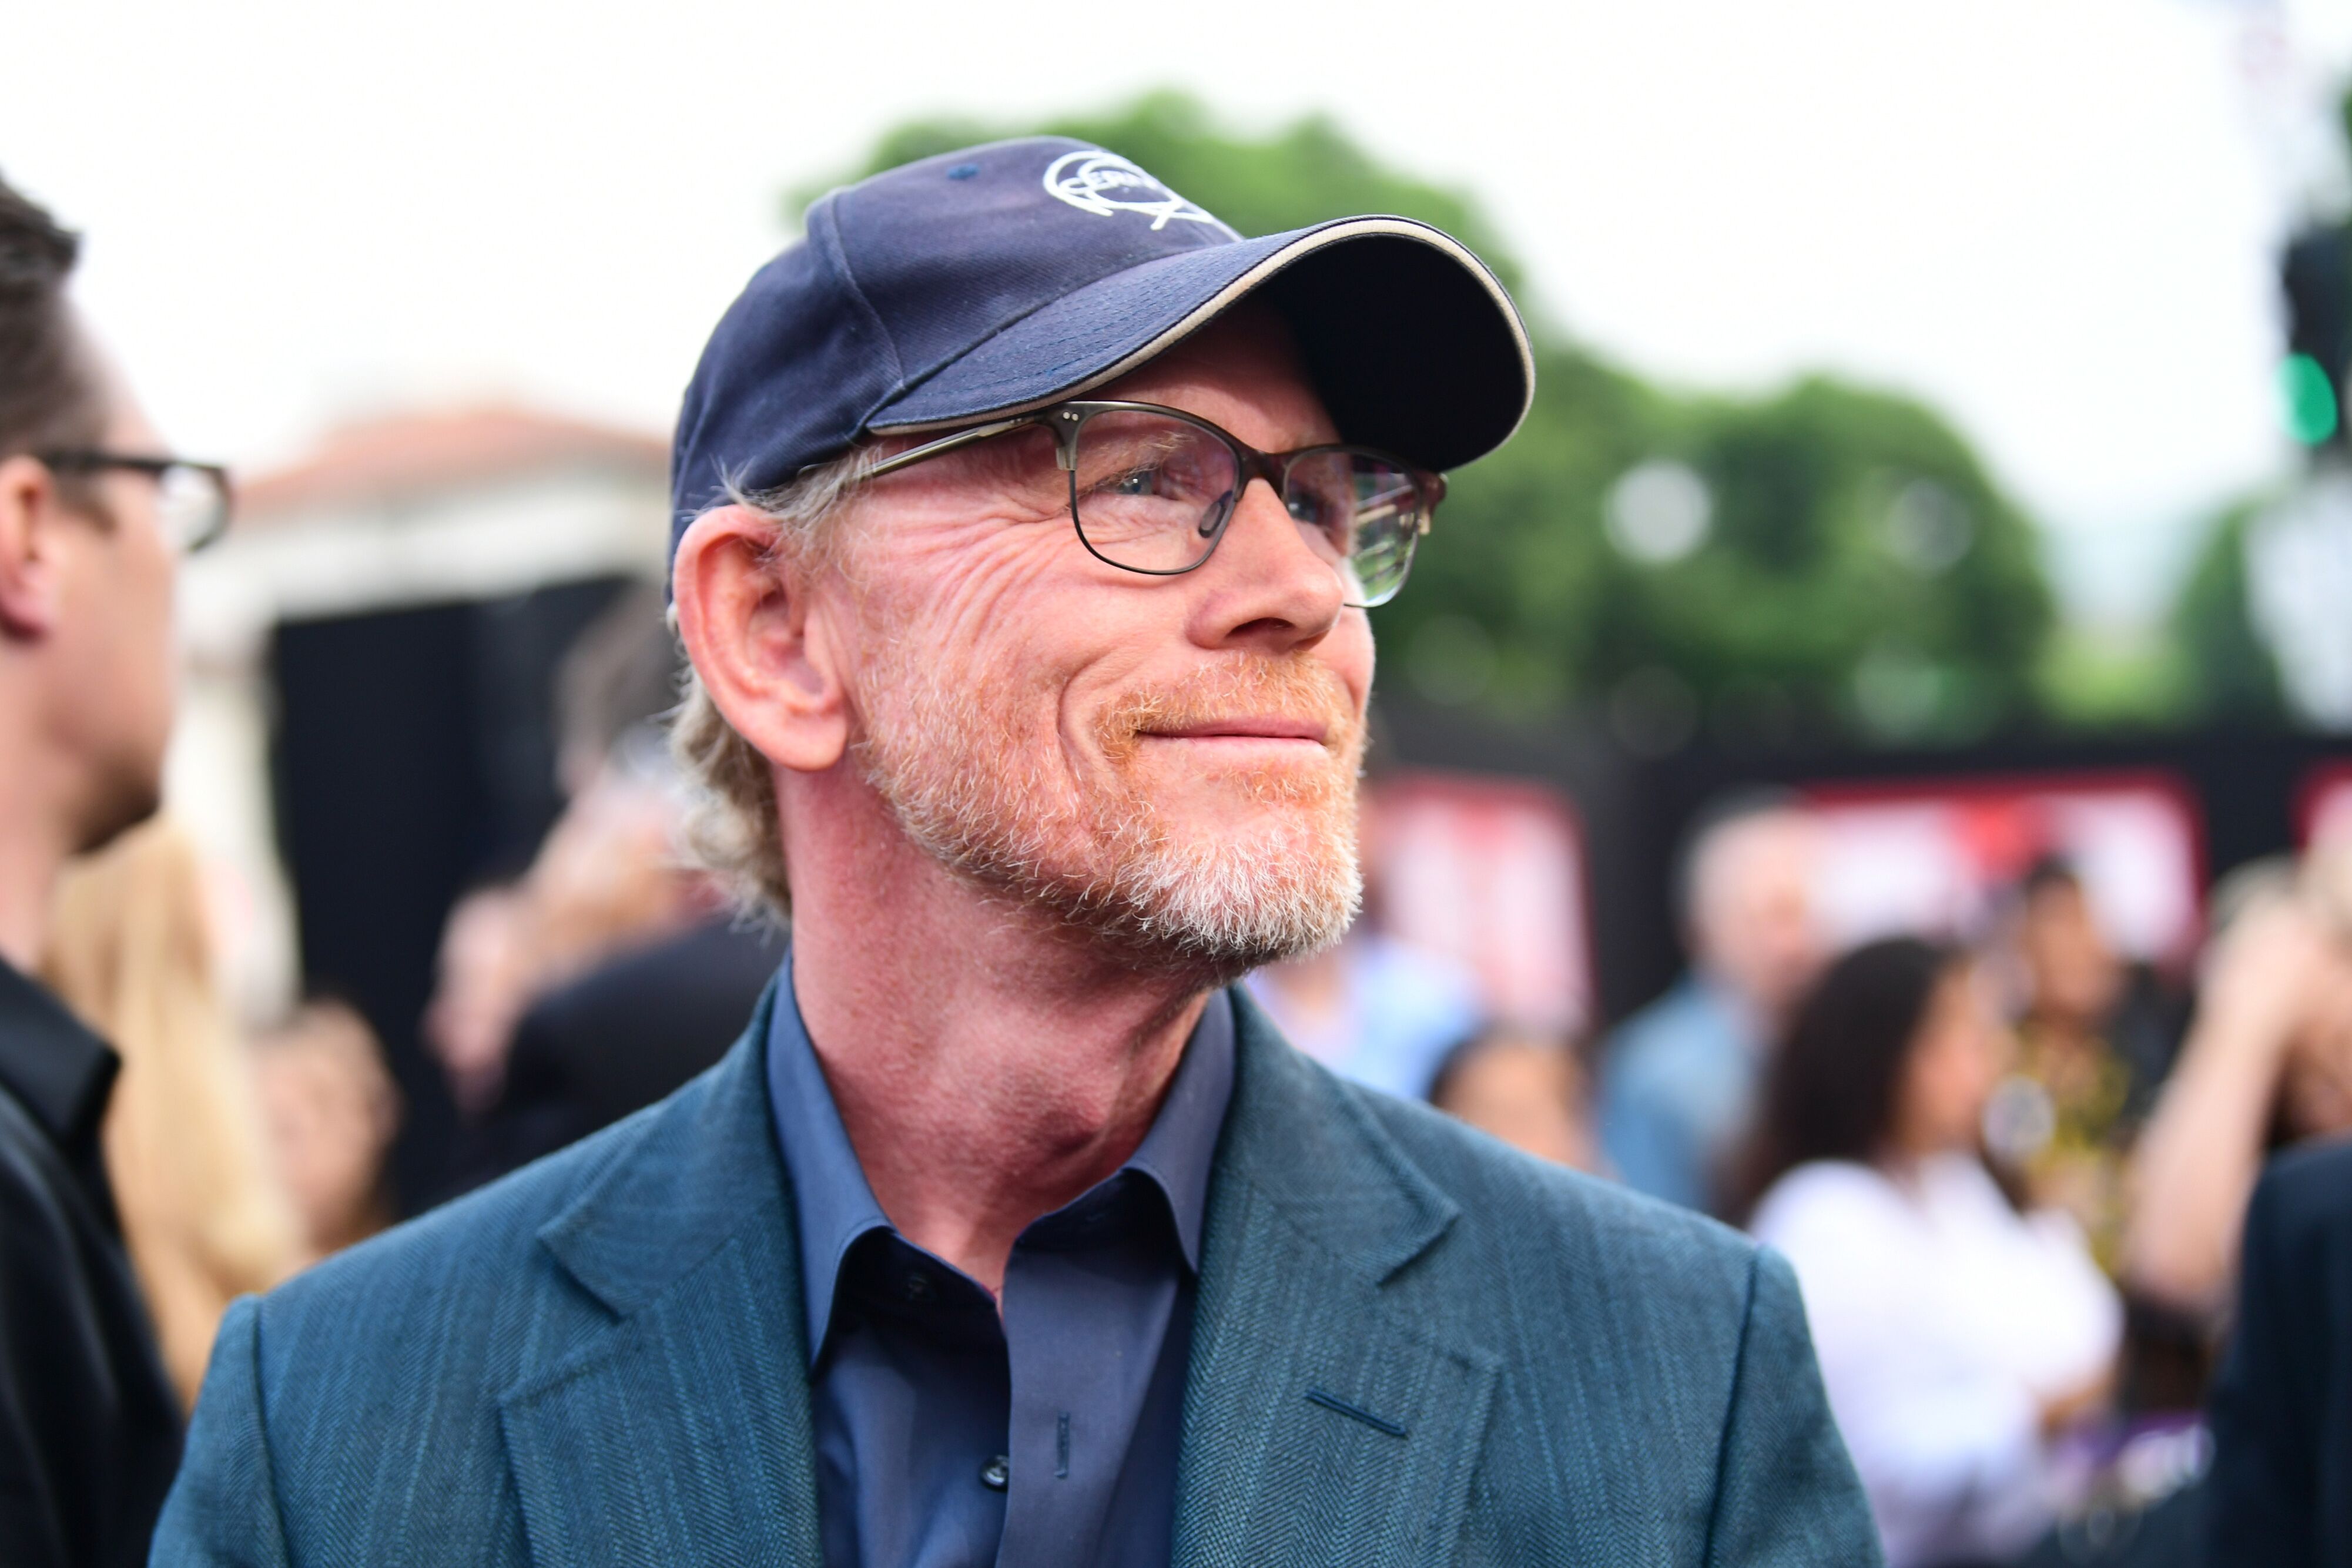 Ron Howard at the premiere of "The Spy Who Dumped Me." | Source: Getty Images